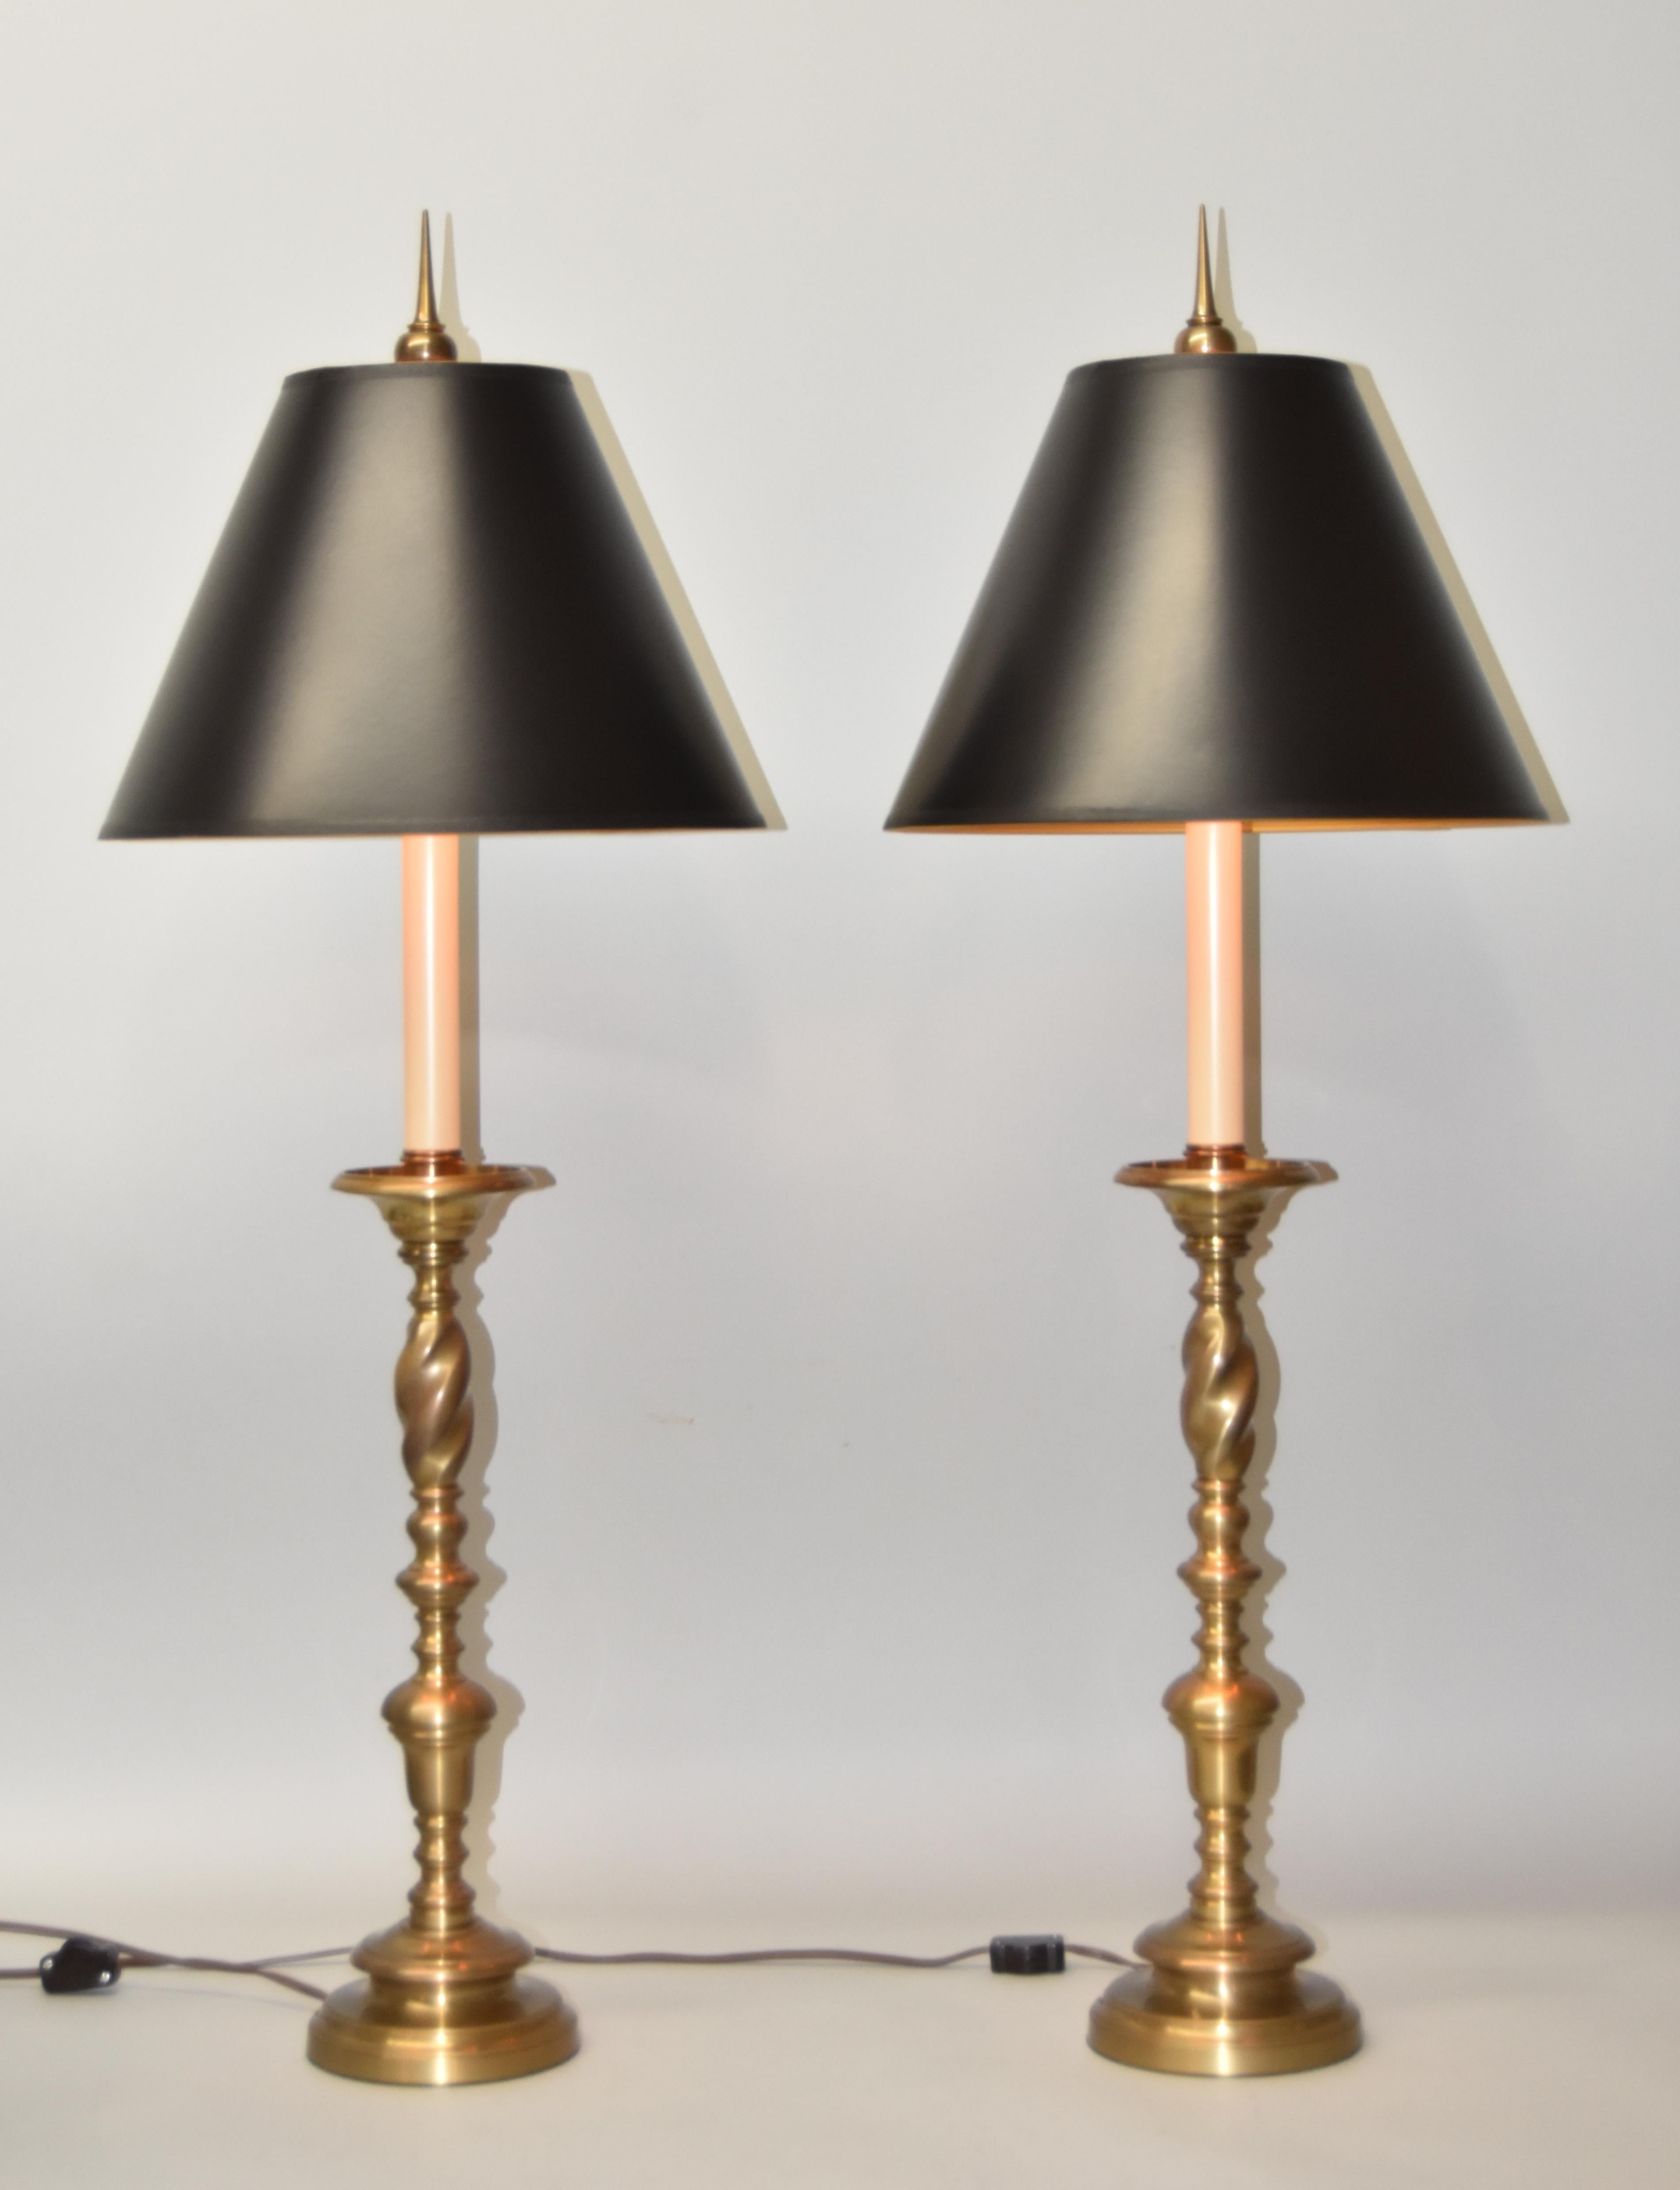 Pair of brass Chapman table lamps with a two way original single sockets. Nice patina. Tall tip finial.